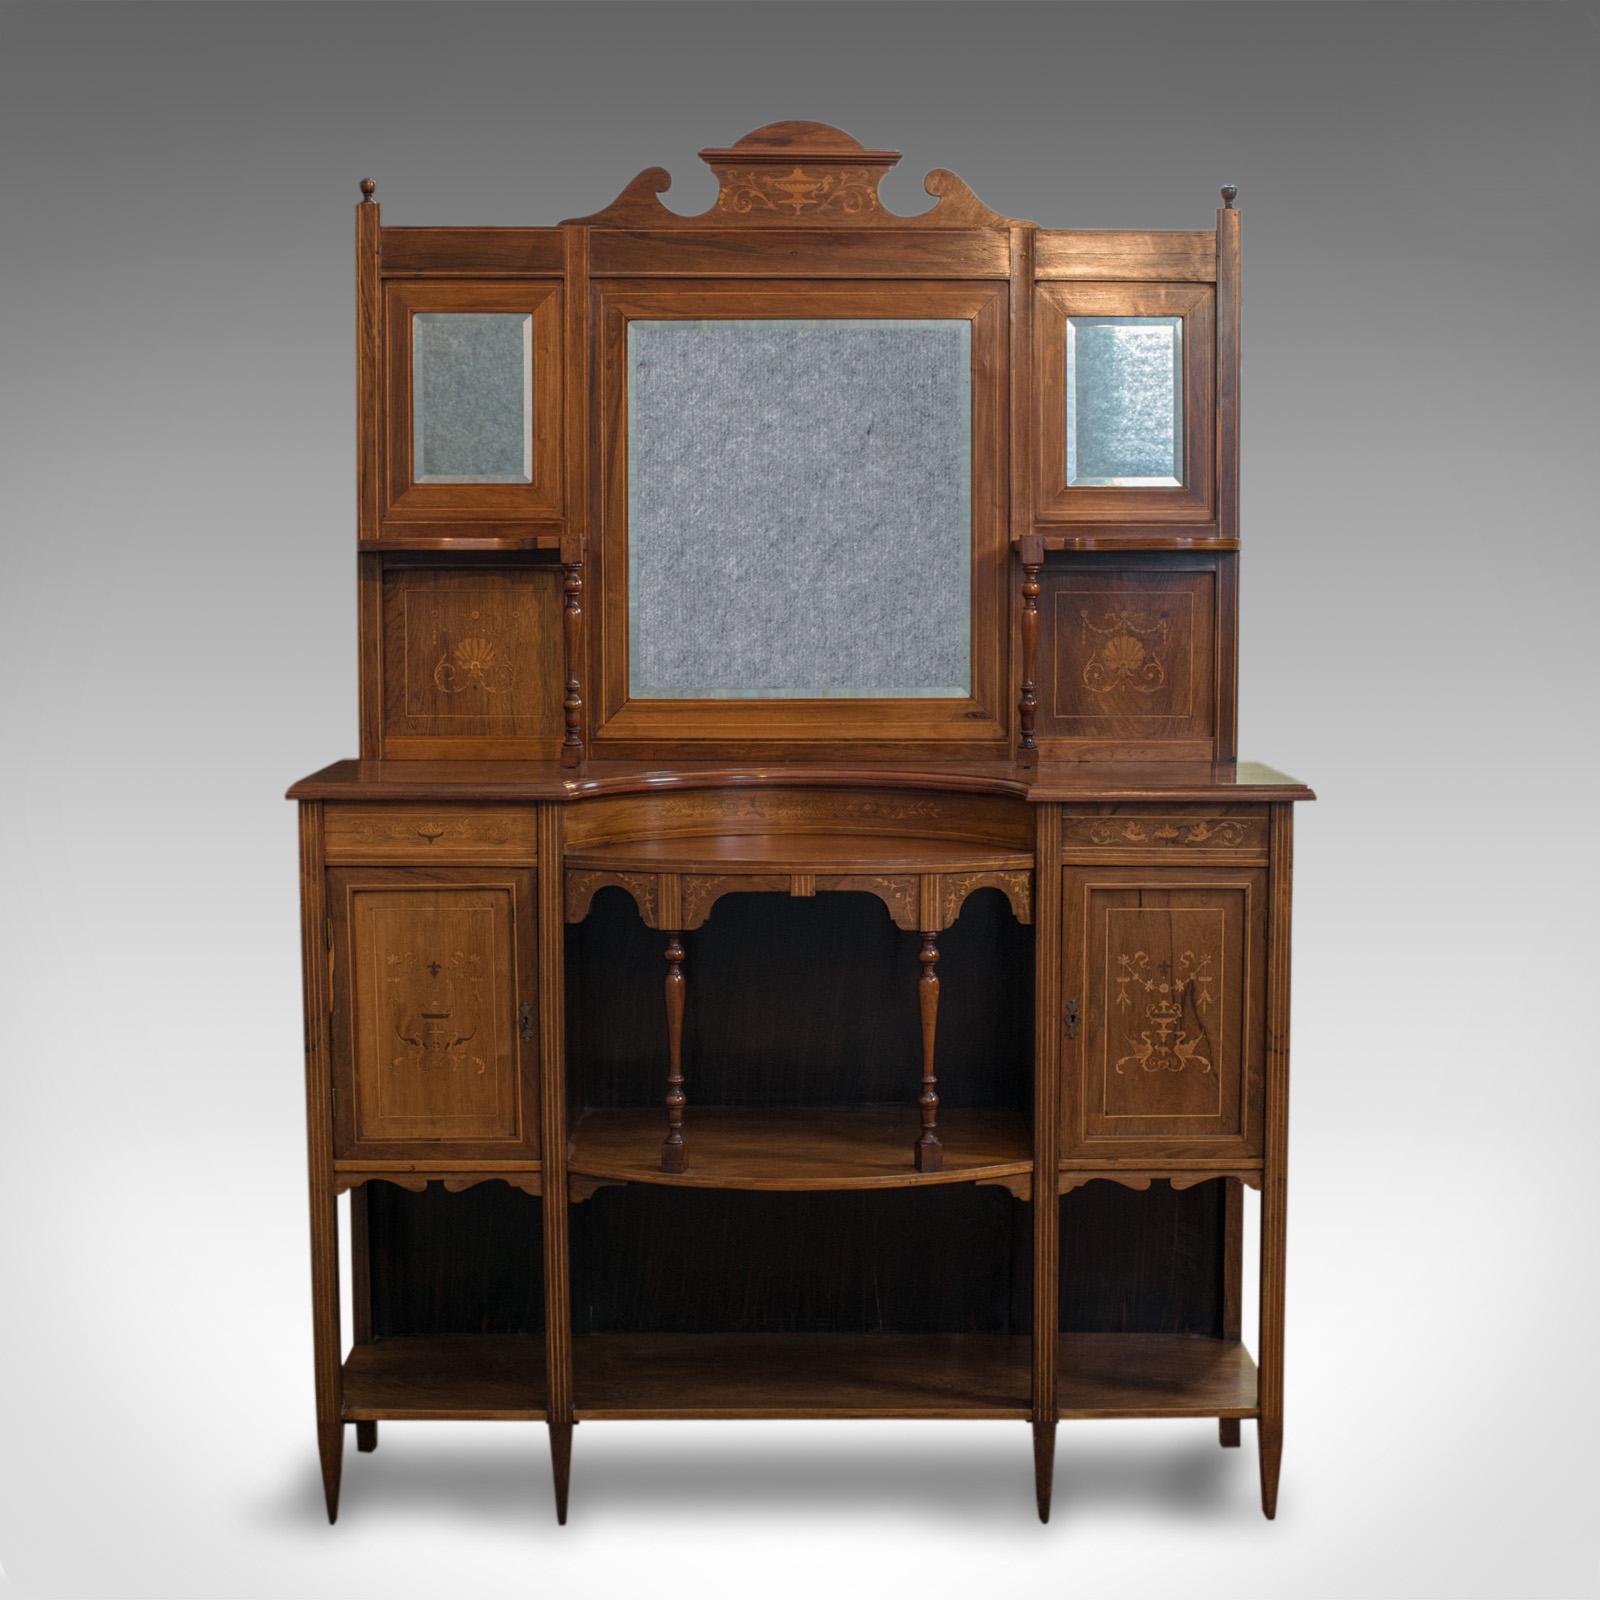 This is an antique sideboard. An English, rosewood dresser with boxwood inlay and dating to the Victorian period, circa 1900.

Impressive form and eye-catching detail
Displaying a desirable aged patina
Rosewood resplendent with Fine grain